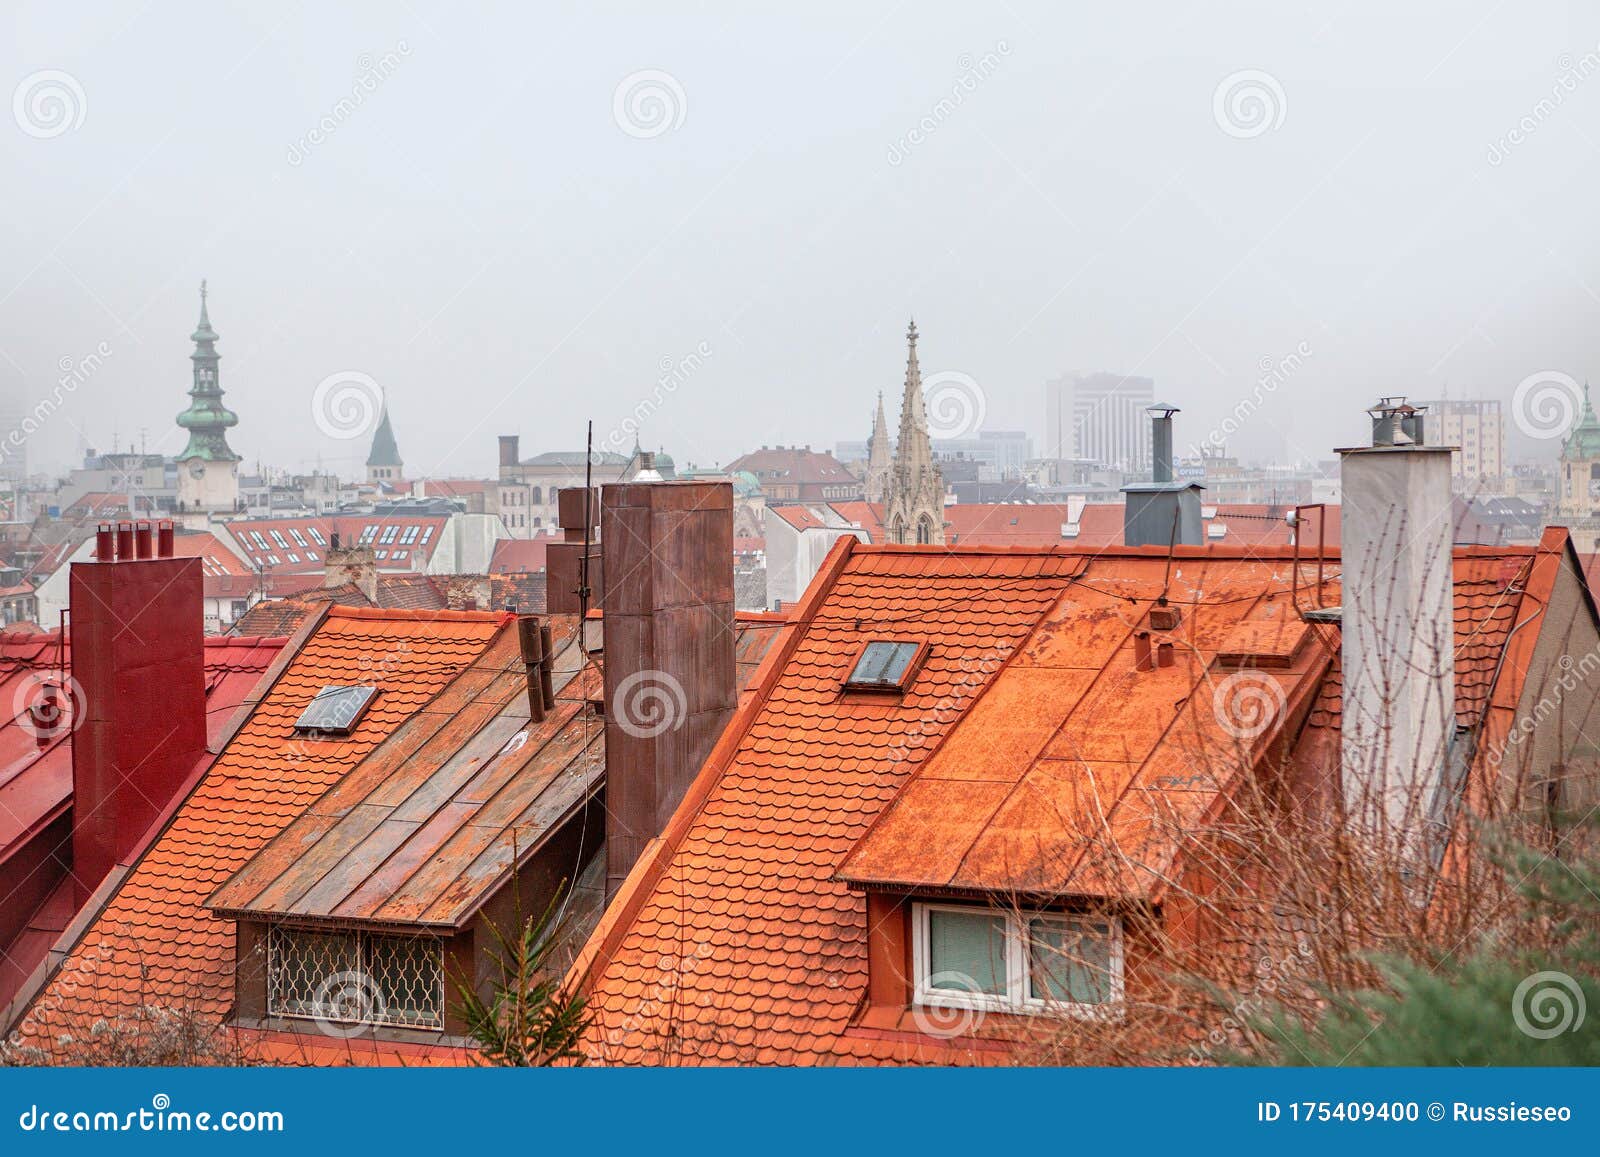 attics and tiled roofs